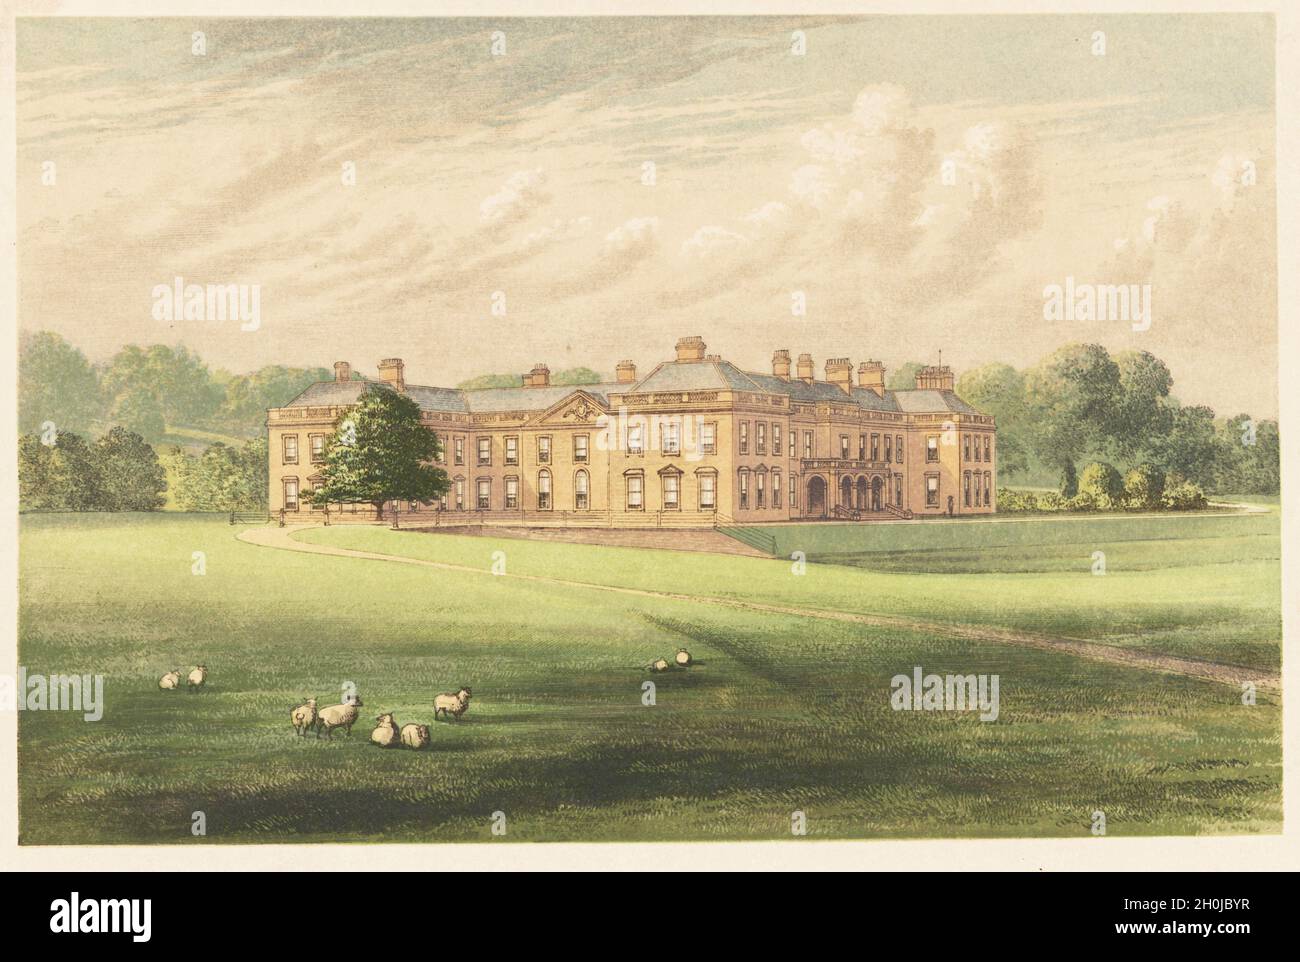 Holme Lacy House, Herefordshire, England. Built in 1674 by Anthony Deane for John Scadamore, 2nd Viscount, and renovated in 1828. Colour woodblock by Benjamin Fawcett in the Baxter process of an illustration by Alexander Francis Lydon from Reverend Francis Orpen Morris’s Picturesque Views of the Seats of Noblemen and Gentlemen of Great Britain and Ireland, William Mackenzie, London, 1880. Stock Photo